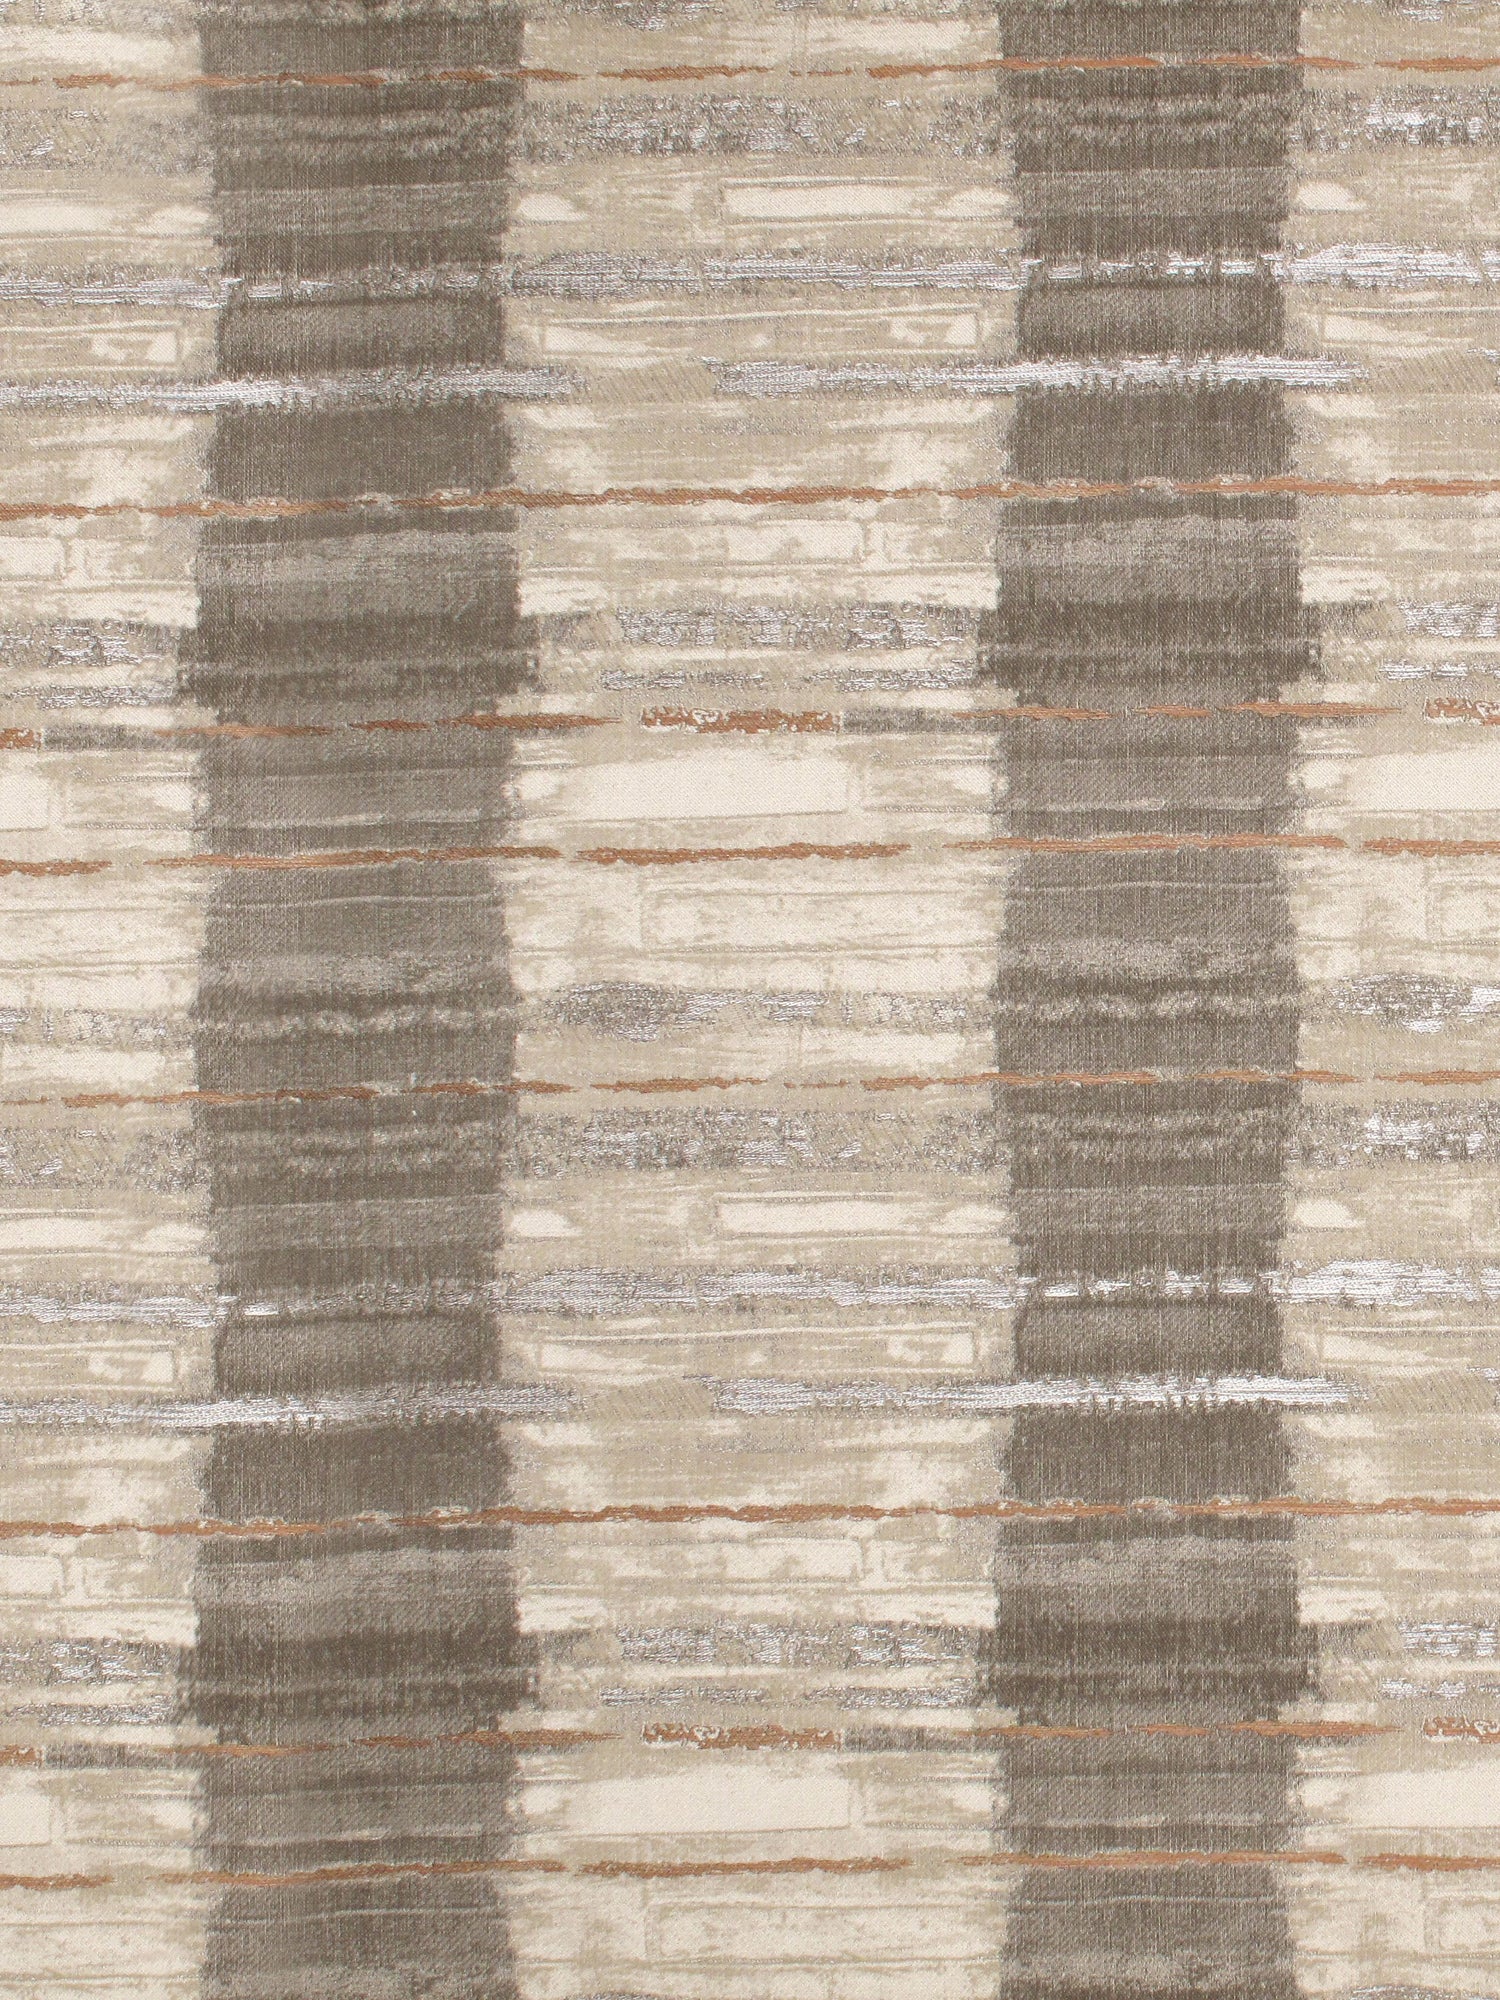 Granite Gorge fabric in driftwood color - pattern number EA 00011647 - by Scalamandre in the Old World Weavers collection